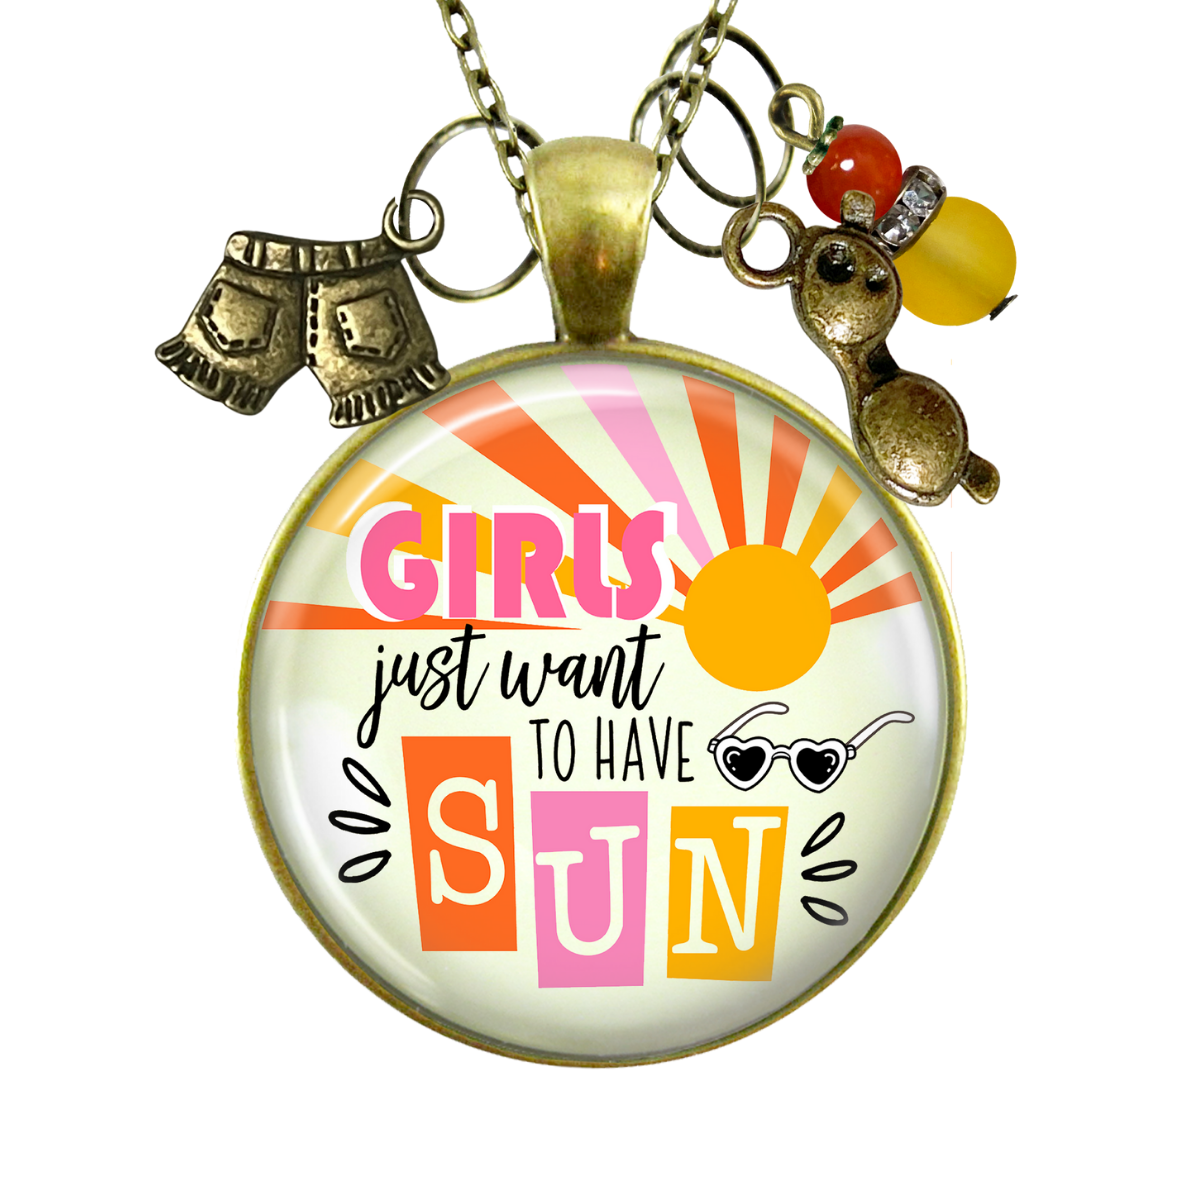 Girls Just Want To Have Sun Summertime Keychain 70s Retro Fashion Tassel Jewelry Sunglasses Charm  Necklace - Gutsy Goodness Handmade Jewelry